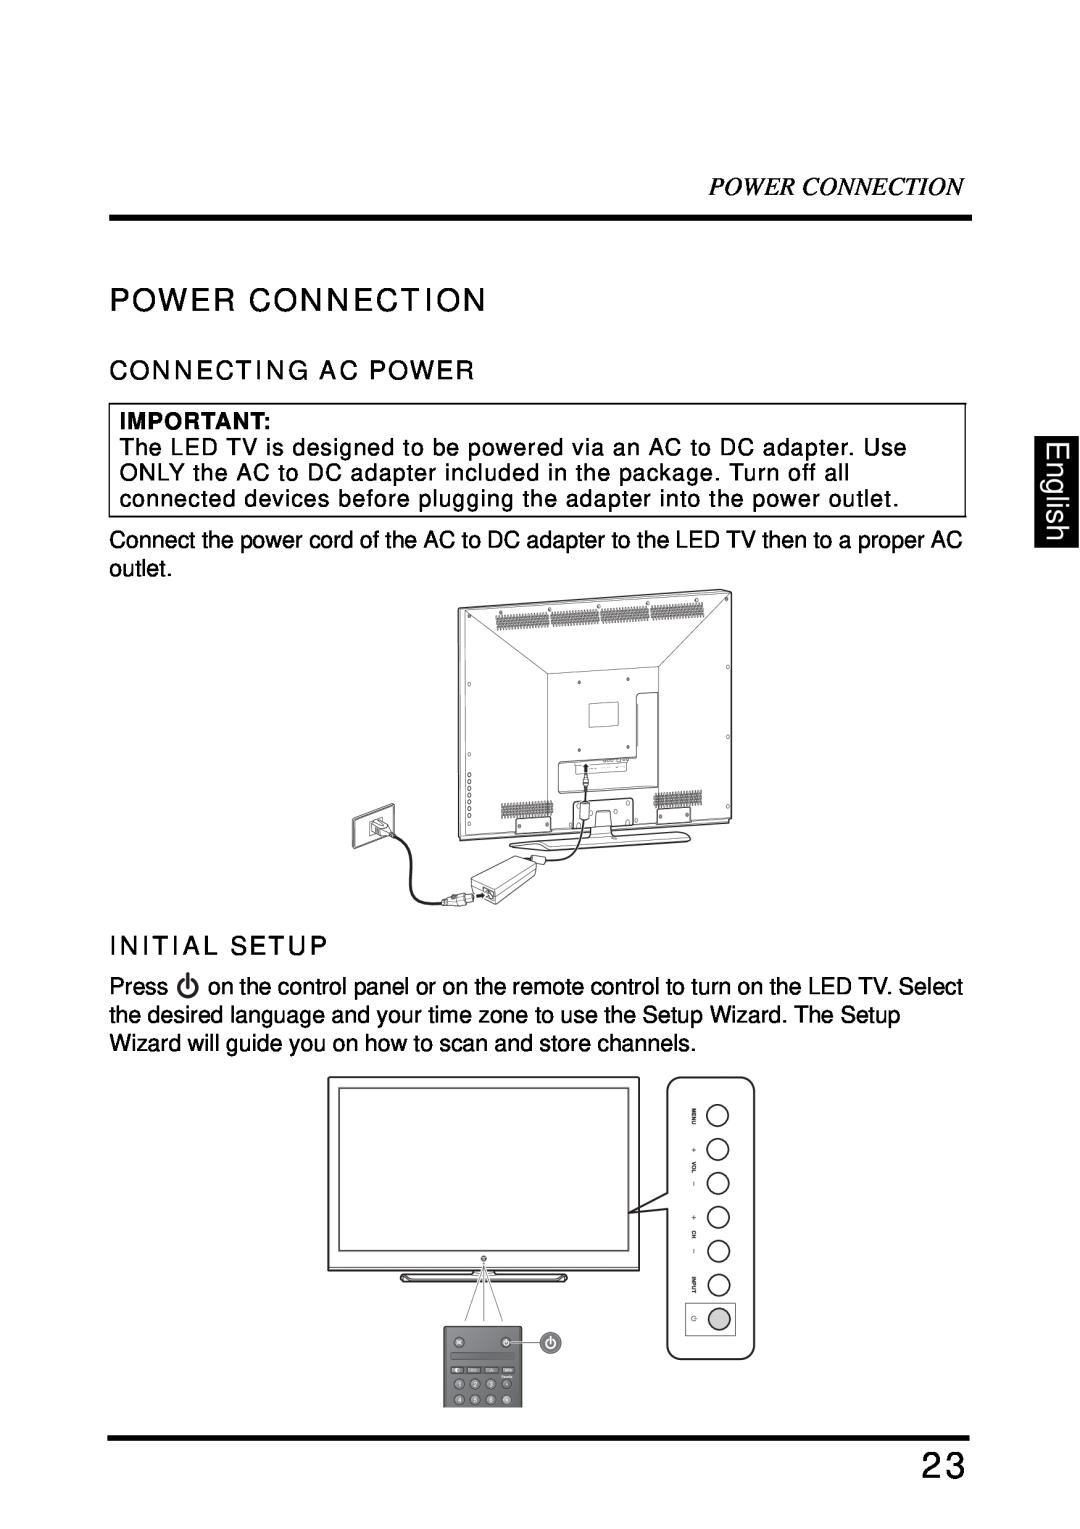 Westinghouse LD-4680 user manual Power Connection, English, Connecting Ac Power, Initial Setup 